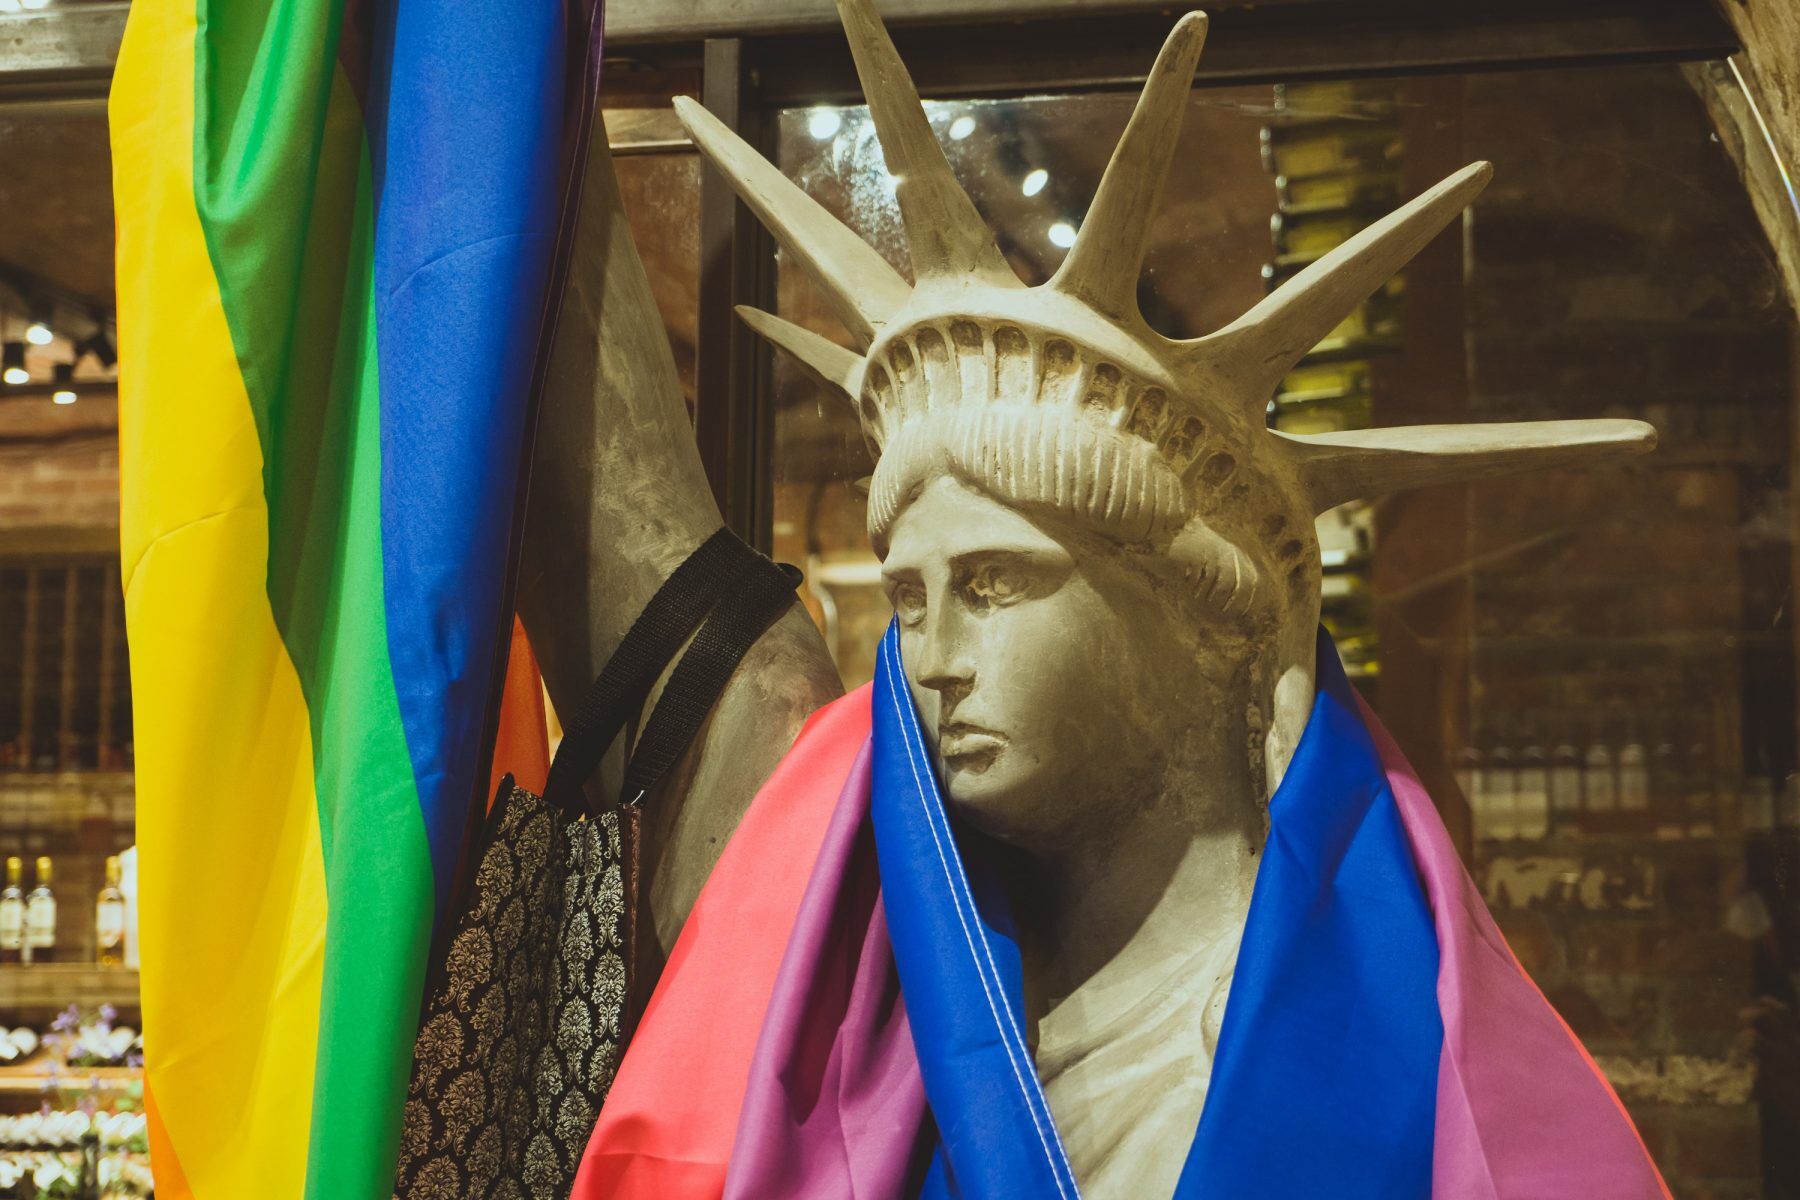 Lady Liberty draped in Pride flag